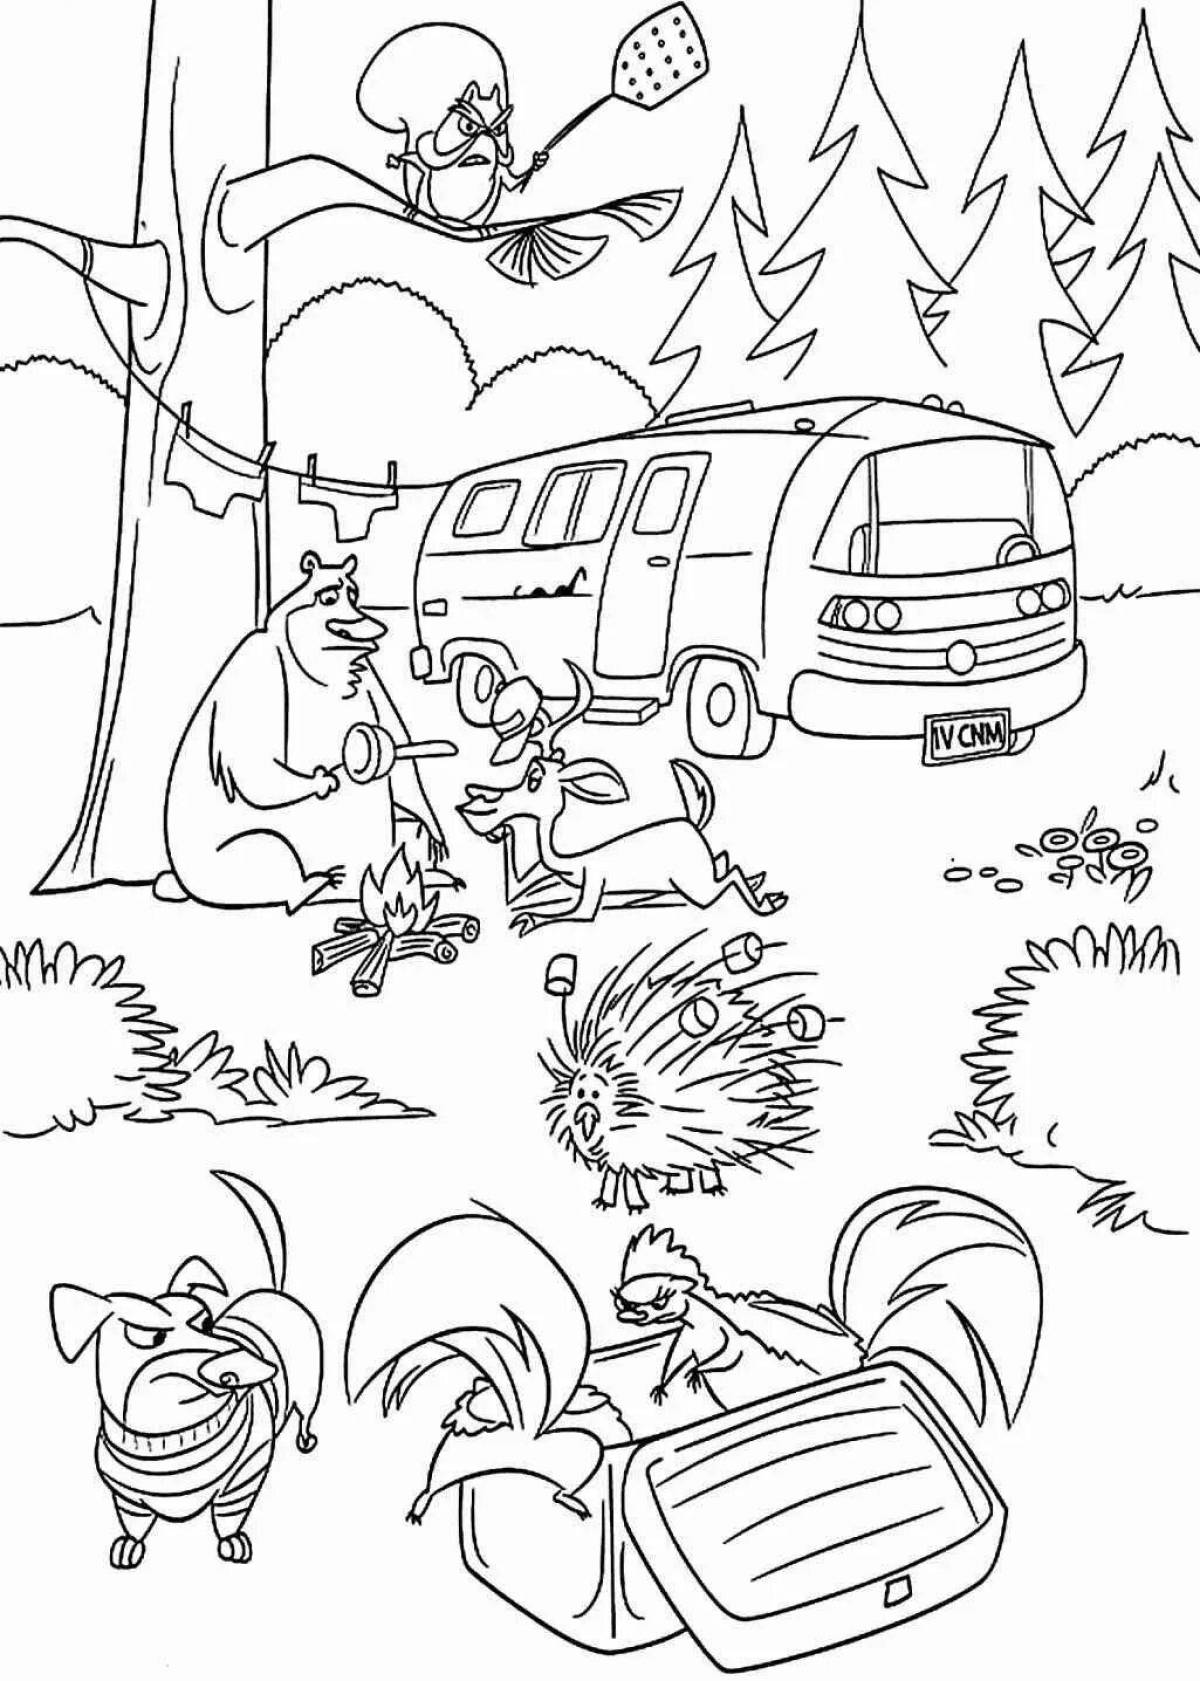 Fairy 'take care of nature' coloring page